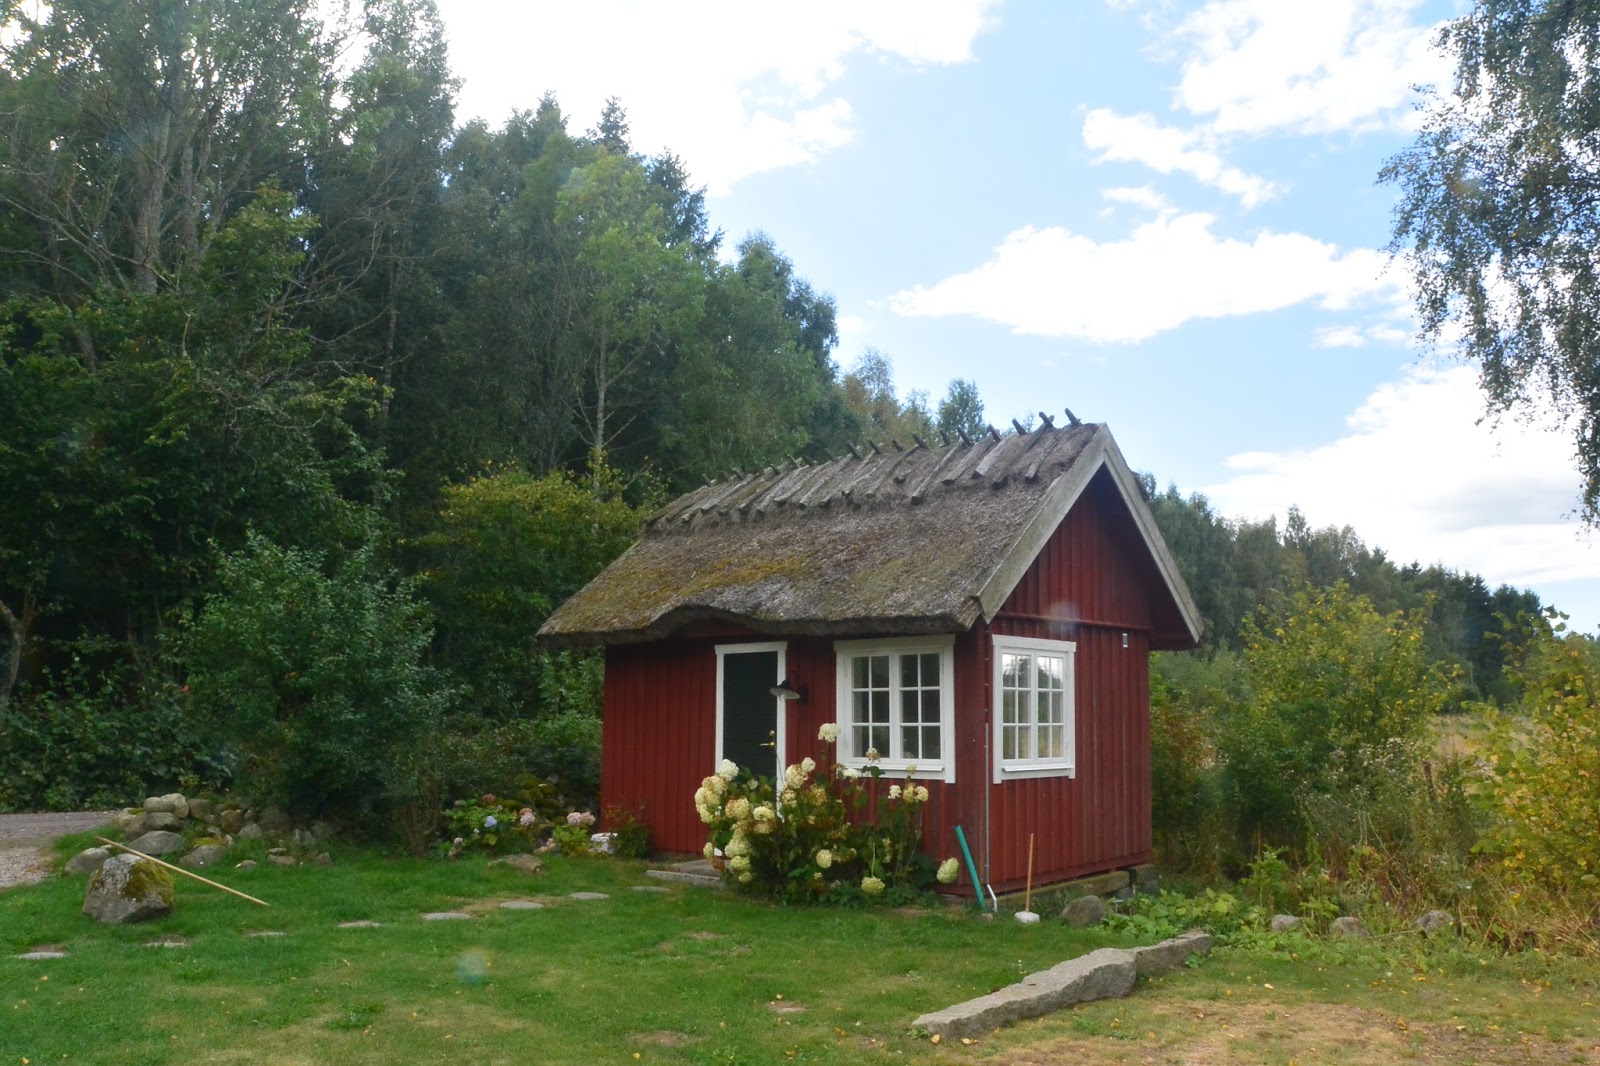  Traditional Swedish farm house in Sk ne for rent